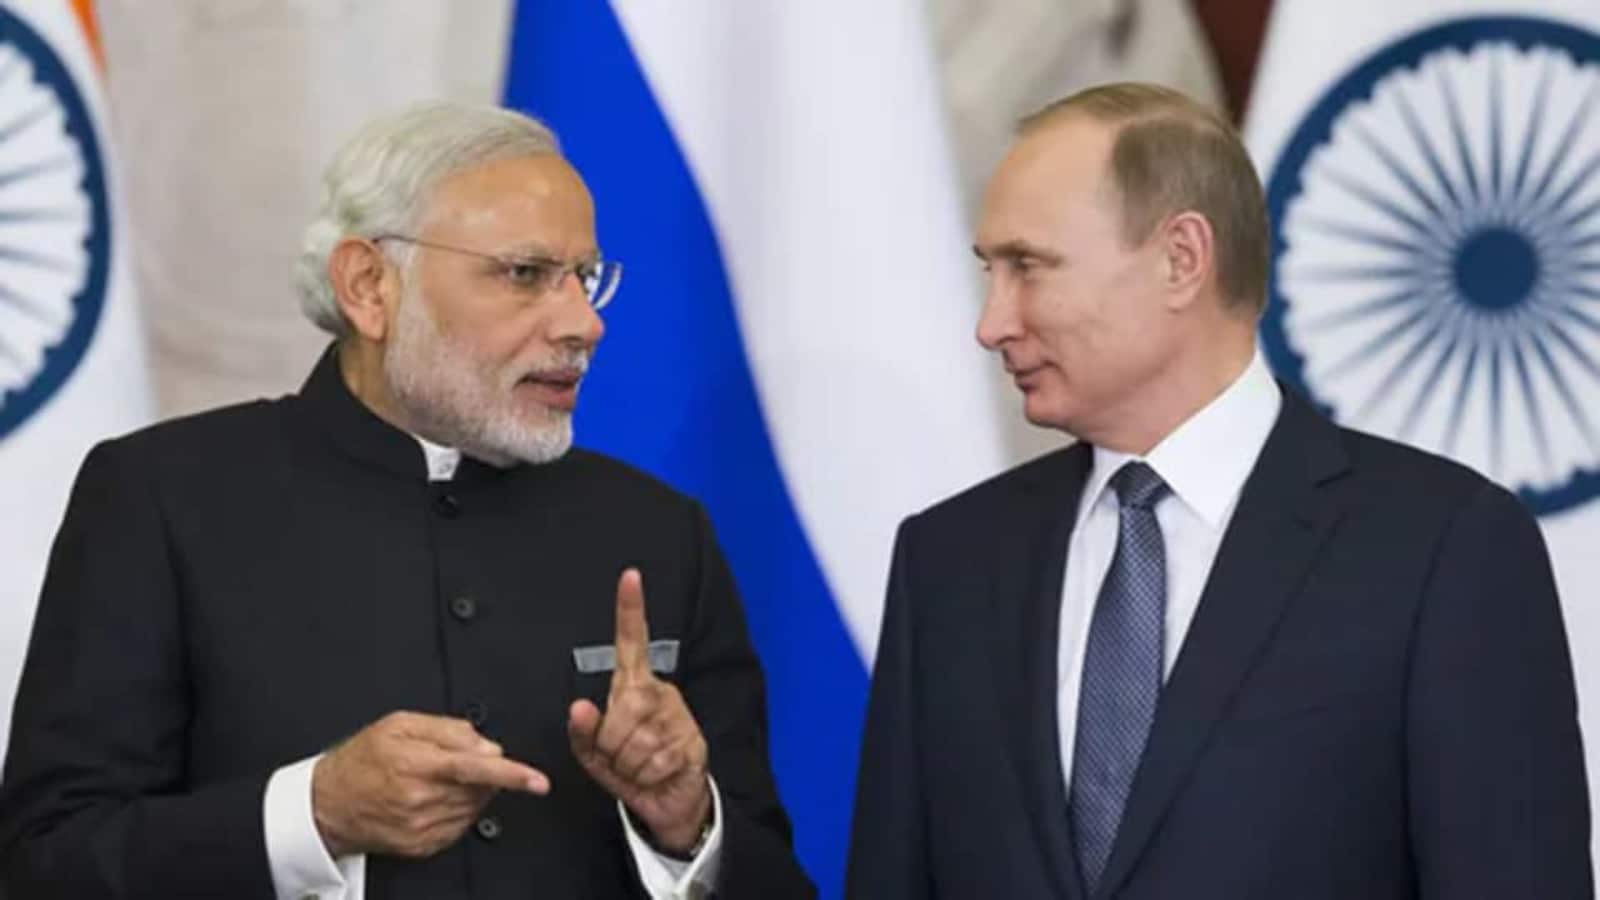 On PM Modi’s ‘not an period of conflict’ message to Putin, Russia says: “The remarks have…”